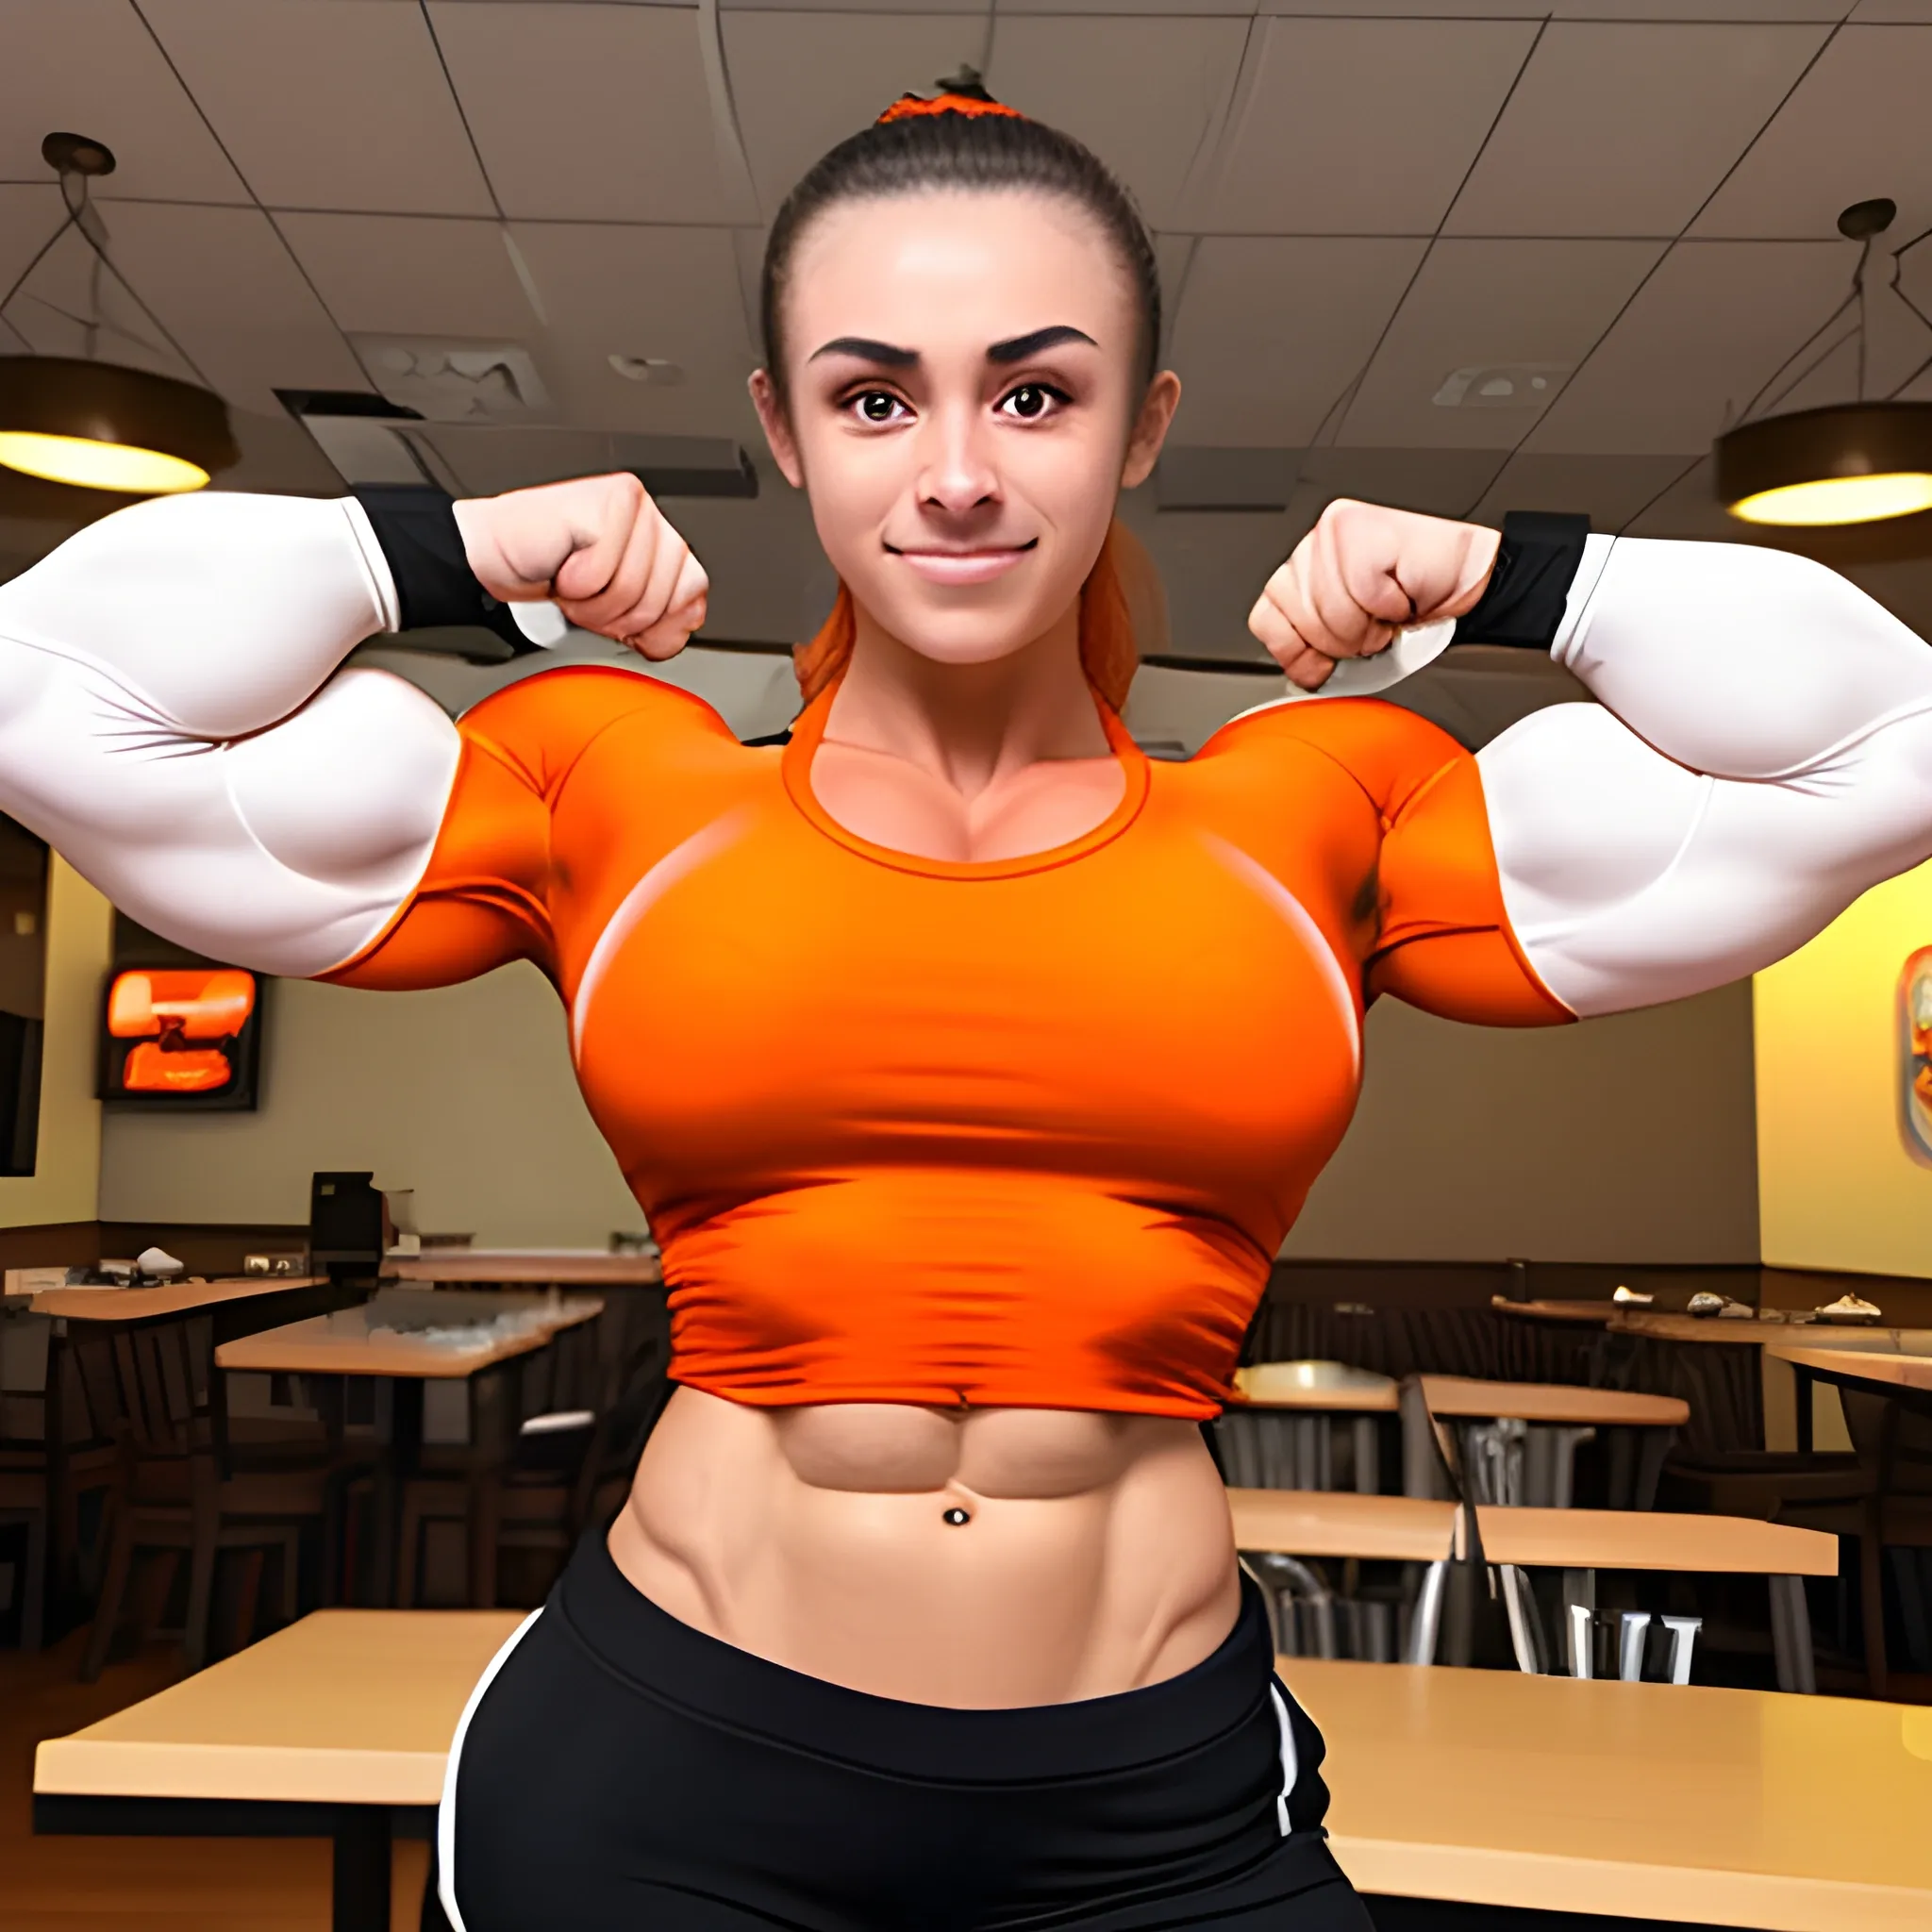 20 year old hyper-muscled female bodybuilder with 25 inch biceps, 30 inch quads, 25 inch waist, wearing white cotton mid-sleeve t-shirt, wearing orange satin short shorts, working in restaurant as a waitress